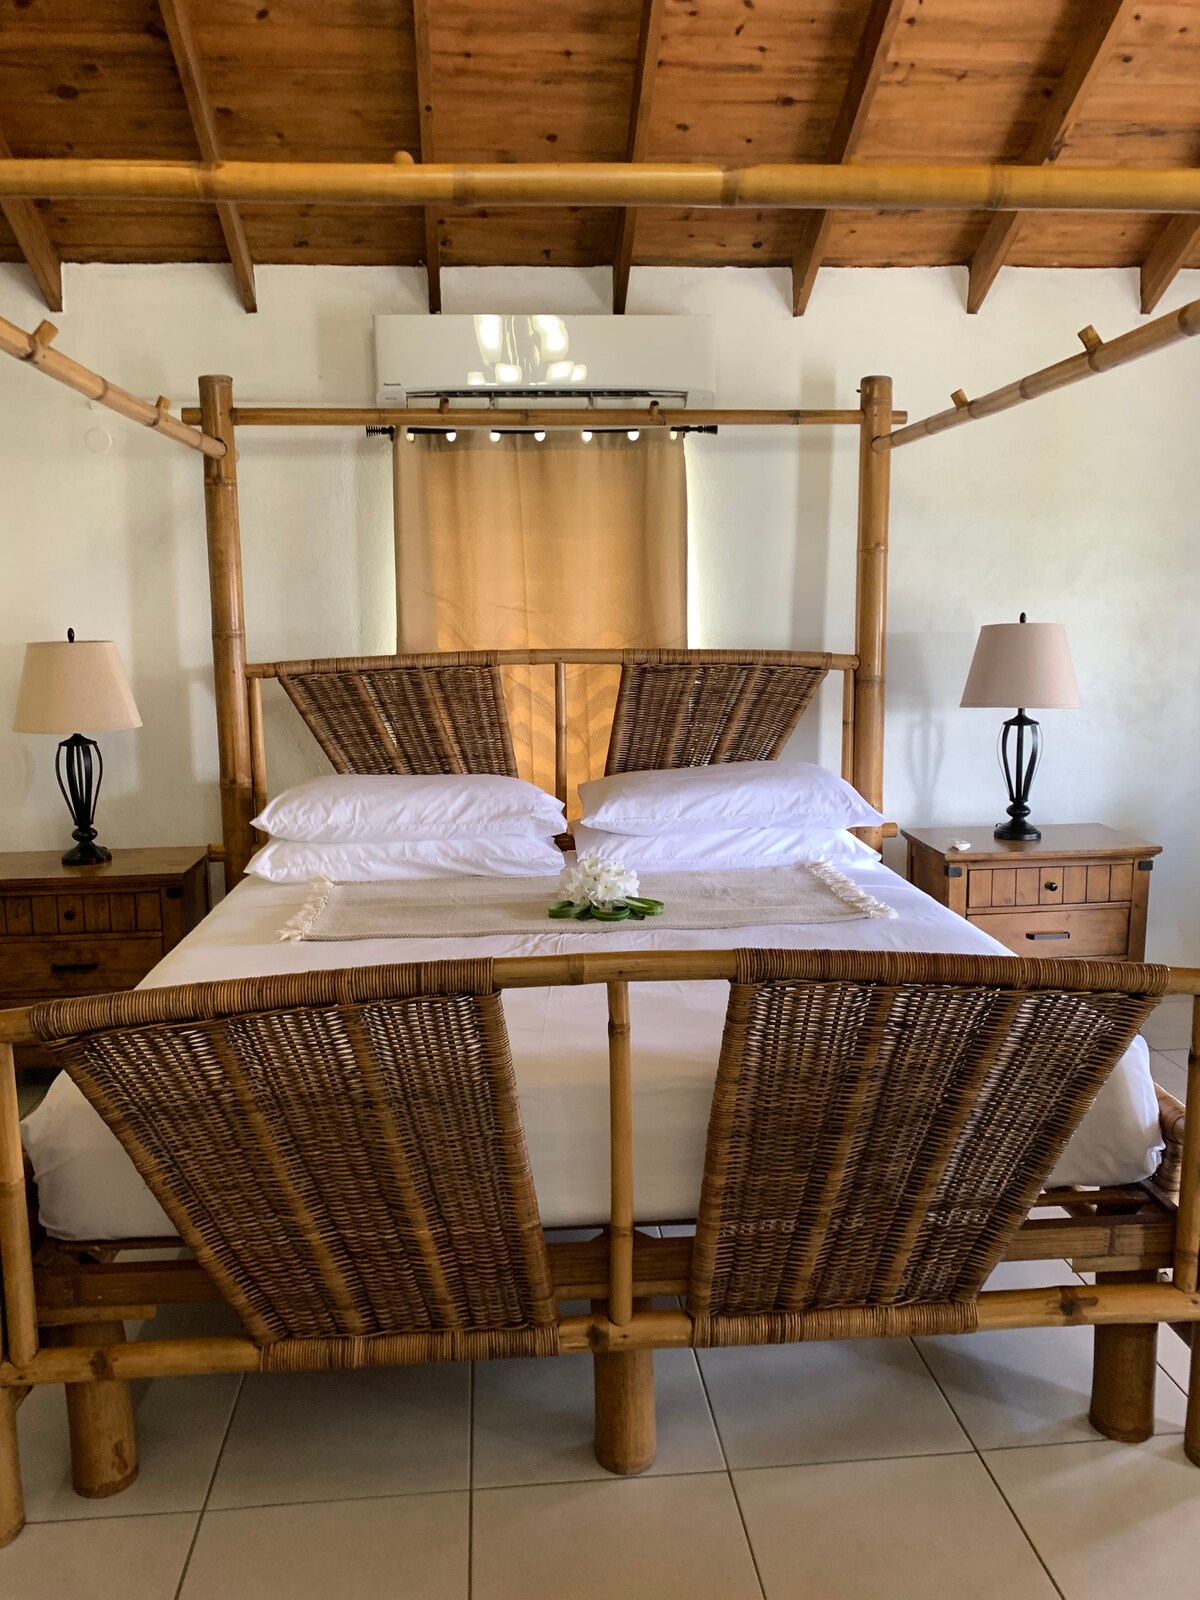 Stay in the heart of Marigot "St. Martin" style